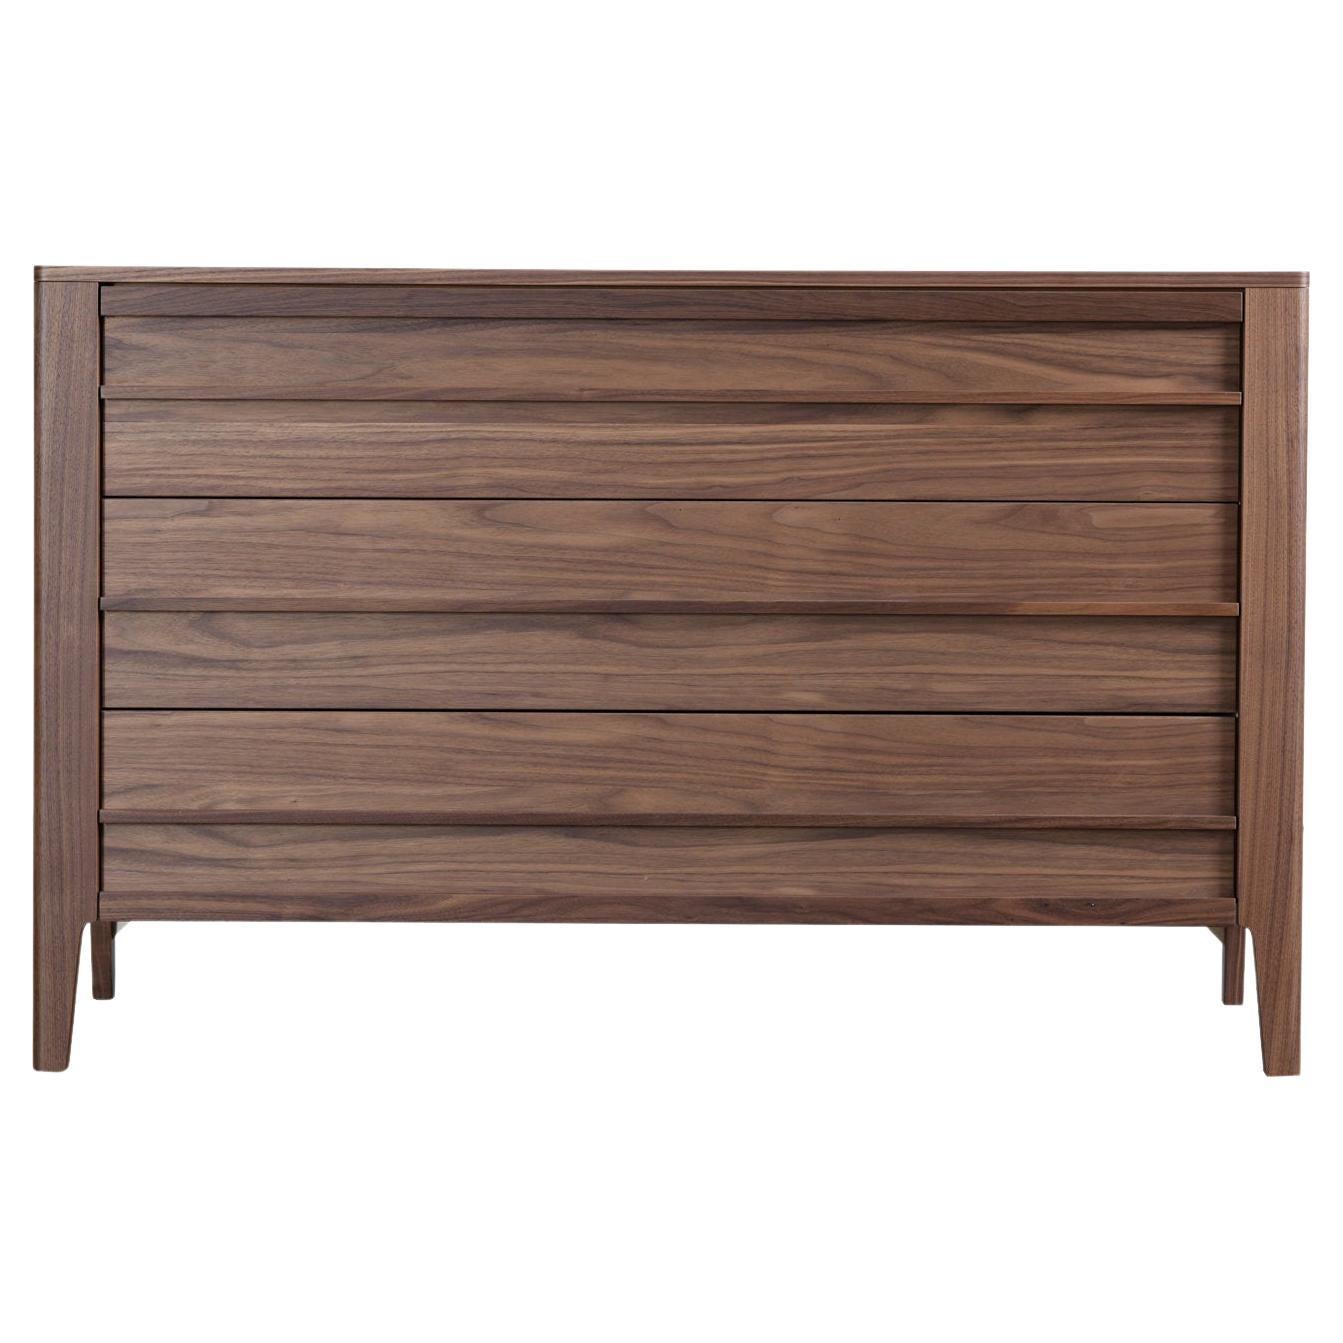 Wood Shangai Dresser MODO10 Collection For Sale